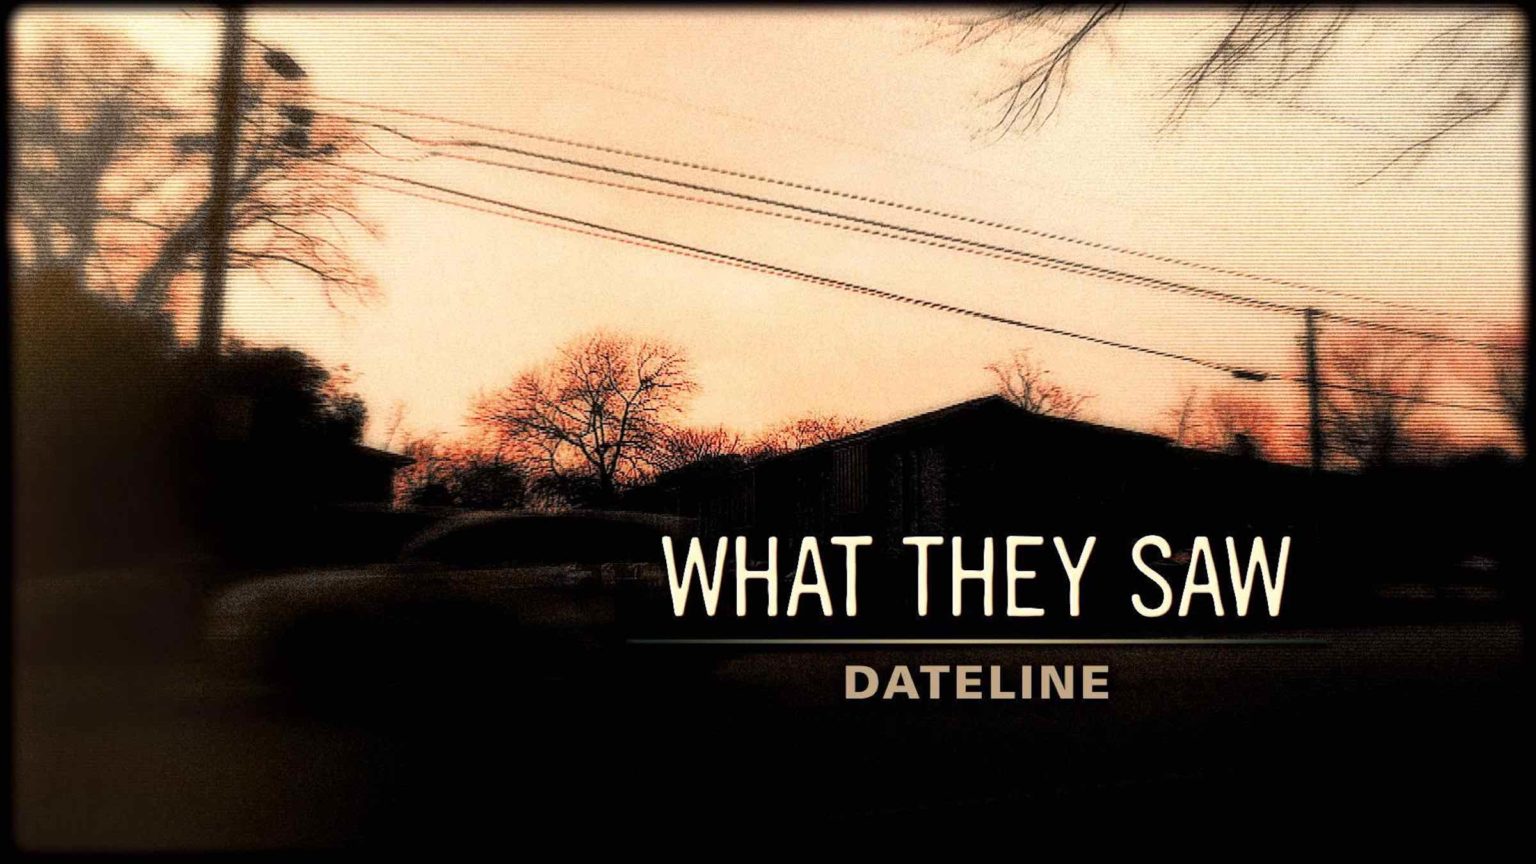 'Dateline' NBC has done a plethora of news stories over the years. It’s a complicated story that 'Dateline' delves into with “What They Saw”. Here's why.